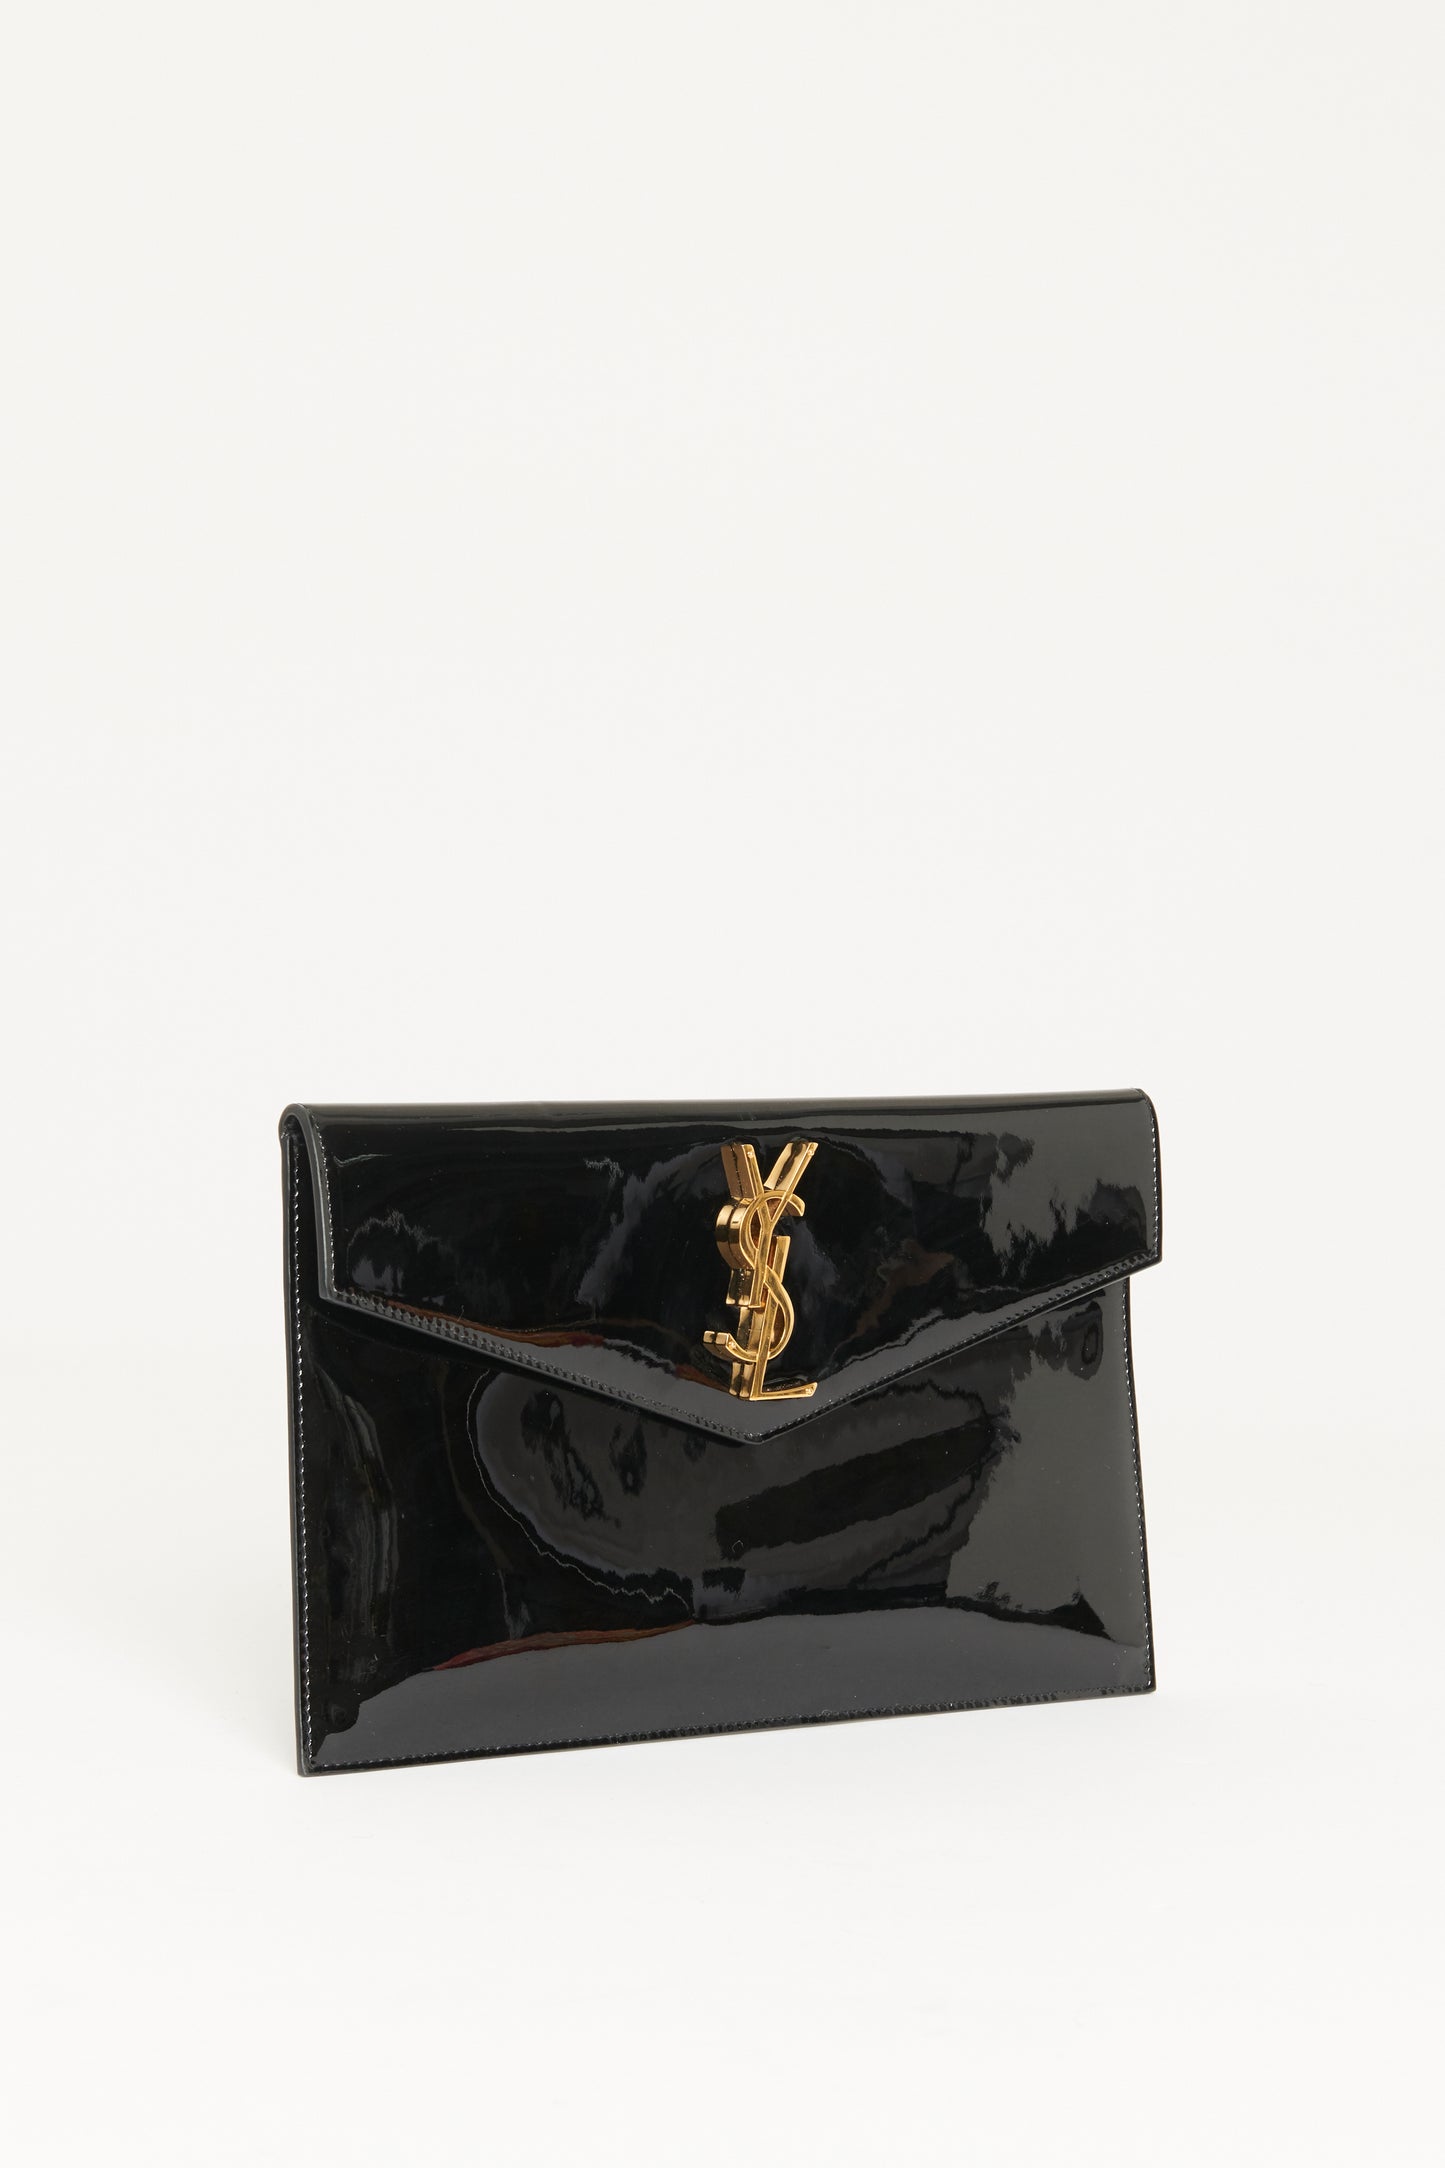 Black Patent Leather Preowned Uptown Cassandre Clutch Bag